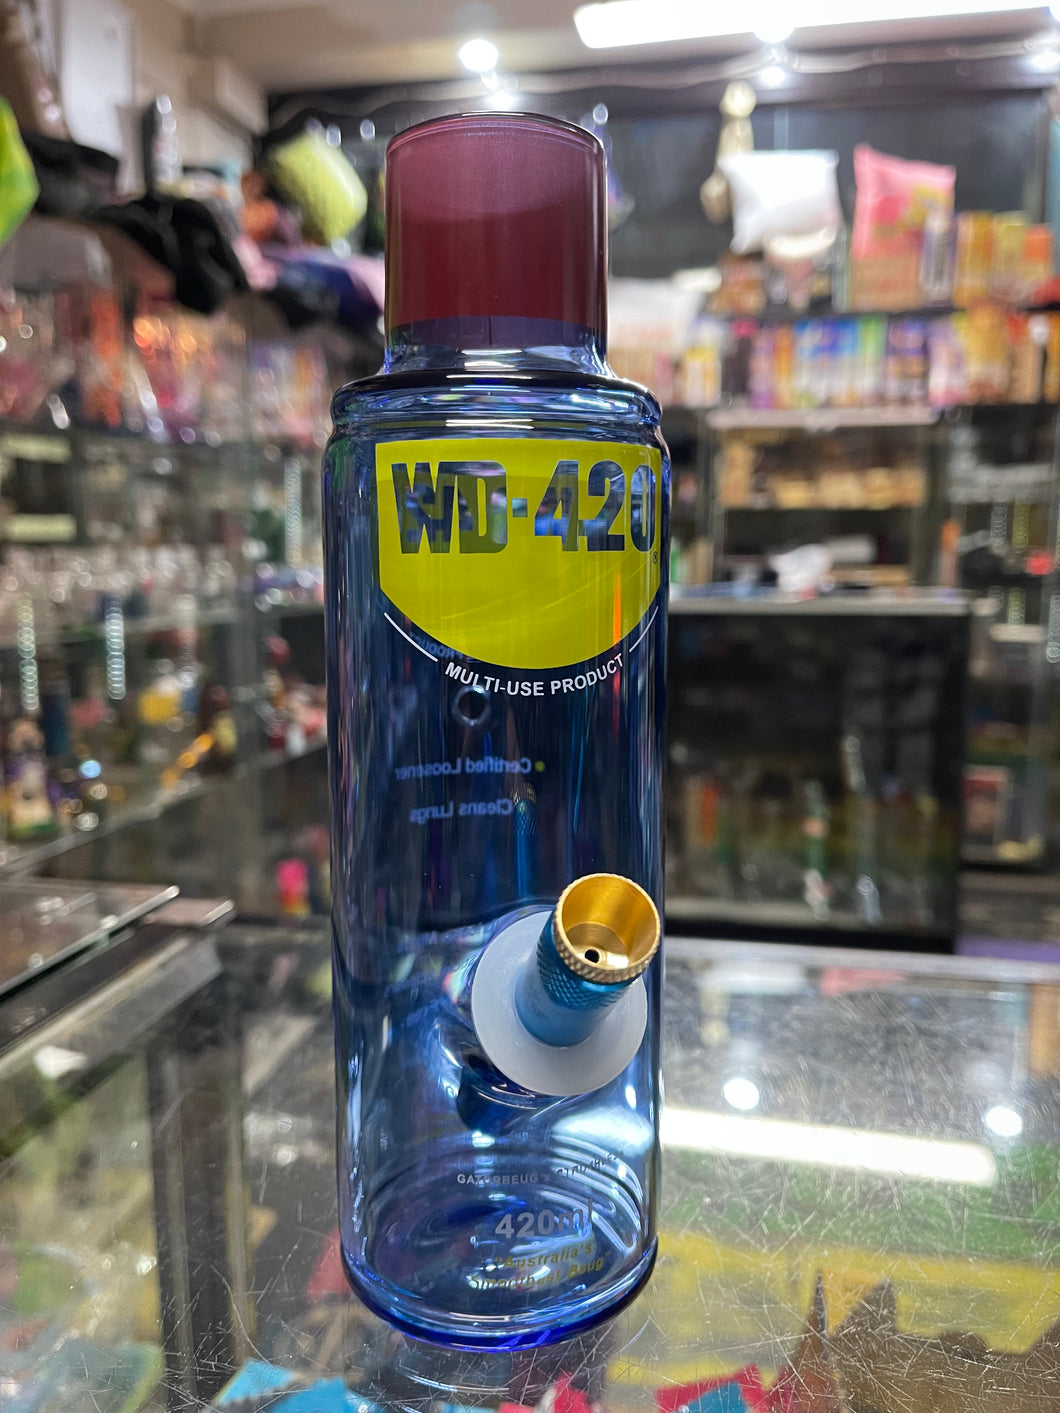 WD-420